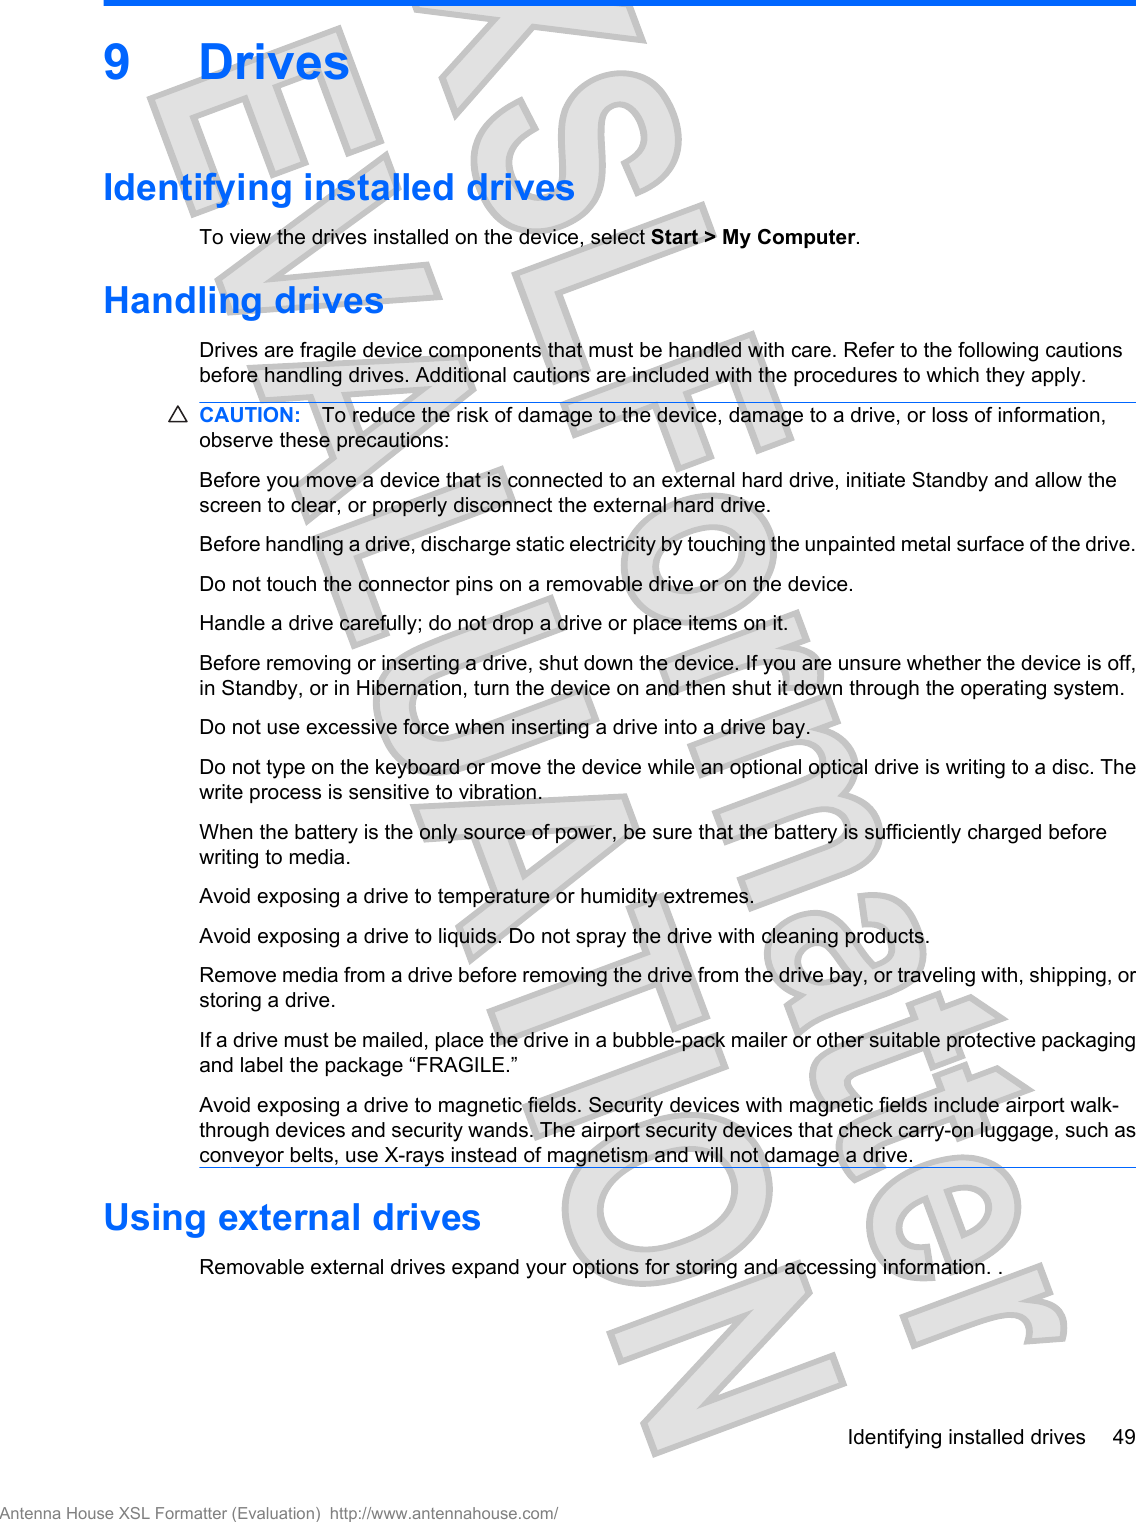 9DrivesIdentifying installed drivesTo view the drives installed on the device, select Start &gt; My Computer.Handling drivesDrives are fragile device components that must be handled with care. Refer to the following cautionsbefore handling drives. Additional cautions are included with the procedures to which they apply.CAUTION: To reduce the risk of damage to the device, damage to a drive, or loss of information,observe these precautions:Before you move a device that is connected to an external hard drive, initiate Standby and allow thescreen to clear, or properly disconnect the external hard drive.Before handling a drive, discharge static electricity by touching the unpainted metal surface of the drive.Do not touch the connector pins on a removable drive or on the device.Handle a drive carefully; do not drop a drive or place items on it.Before removing or inserting a drive, shut down the device. If you are unsure whether the device is off,in Standby, or in Hibernation, turn the device on and then shut it down through the operating system.Do not use excessive force when inserting a drive into a drive bay.Do not type on the keyboard or move the device while an optional optical drive is writing to a disc. Thewrite process is sensitive to vibration.When the battery is the only source of power, be sure that the battery is sufficiently charged beforewriting to media.Avoid exposing a drive to temperature or humidity extremes.Avoid exposing a drive to liquids. Do not spray the drive with cleaning products.Remove media from a drive before removing the drive from the drive bay, or traveling with, shipping, orstoring a drive.If a drive must be mailed, place the drive in a bubble-pack mailer or other suitable protective packagingand label the package “FRAGILE.”Avoid exposing a drive to magnetic fields. Security devices with magnetic fields include airport walk-through devices and security wands. The airport security devices that check carry-on luggage, such asconveyor belts, use X-rays instead of magnetism and will not damage a drive.Using external drivesRemovable external drives expand your options for storing and accessing information. .Identifying installed drives 49Antenna House XSL Formatter (Evaluation)  http://www.antennahouse.com/